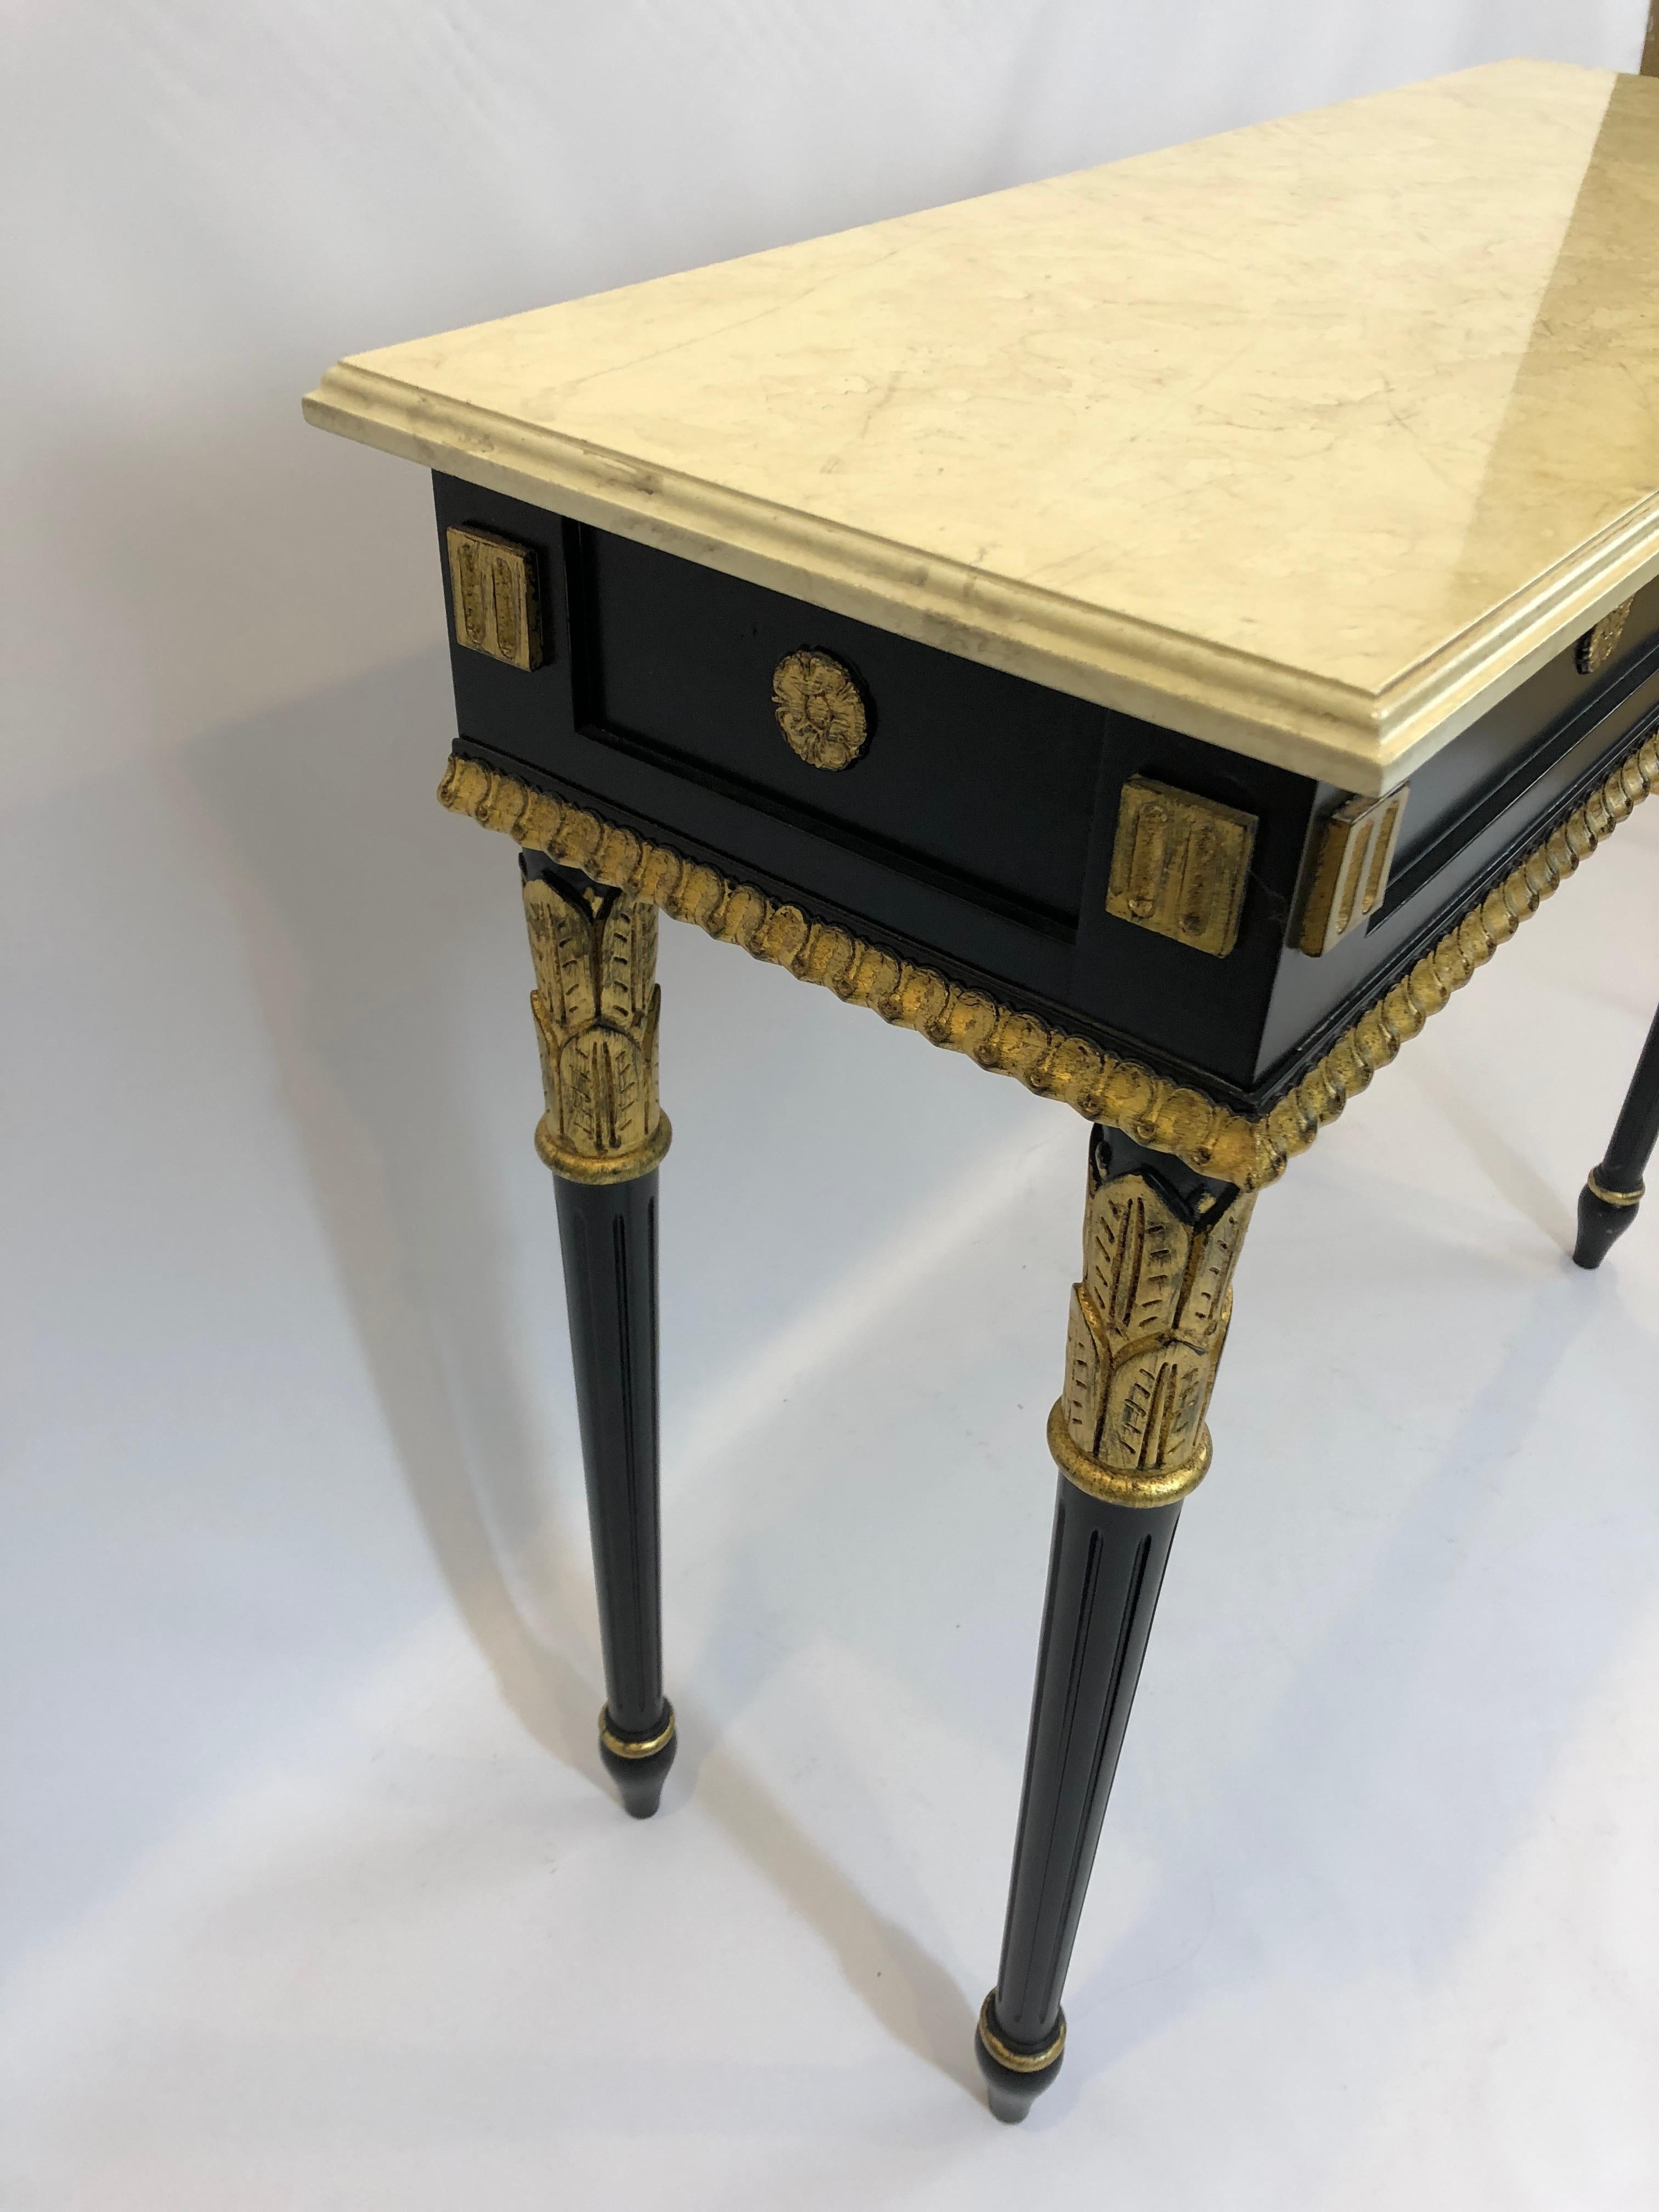 Glamorous Regency style small console table having an ebonized base with beautiful gilded decoration, with off-white faux marble top.